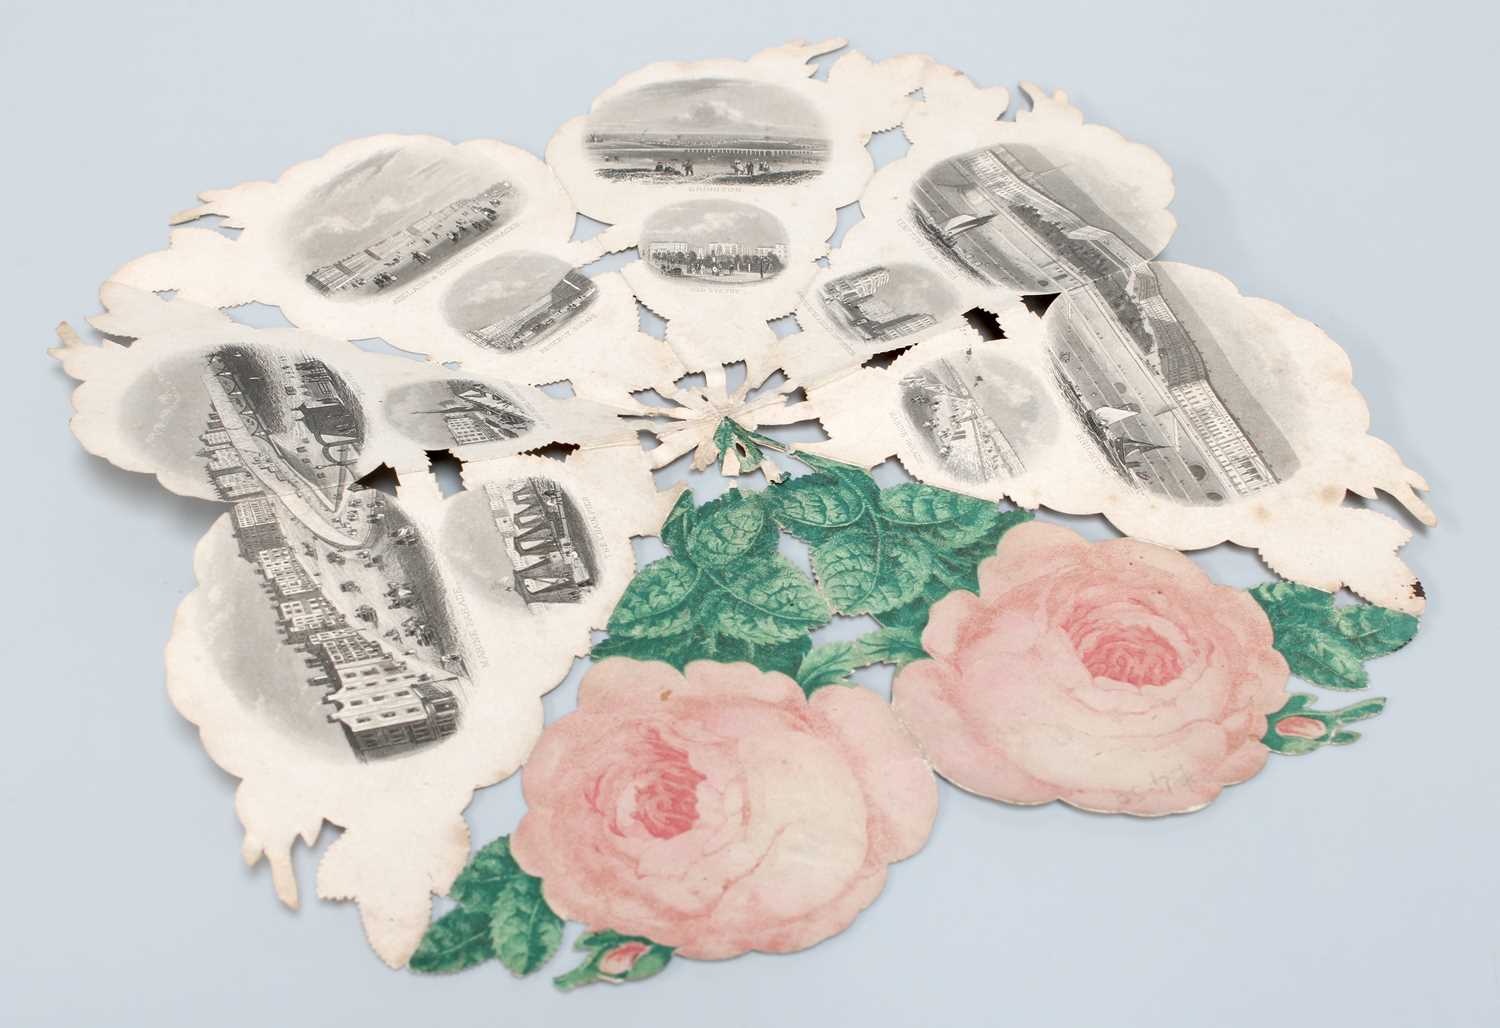 Victorian Folding Paper Souvenir, folds to form a rose, opens to reveal small engraved vignettes